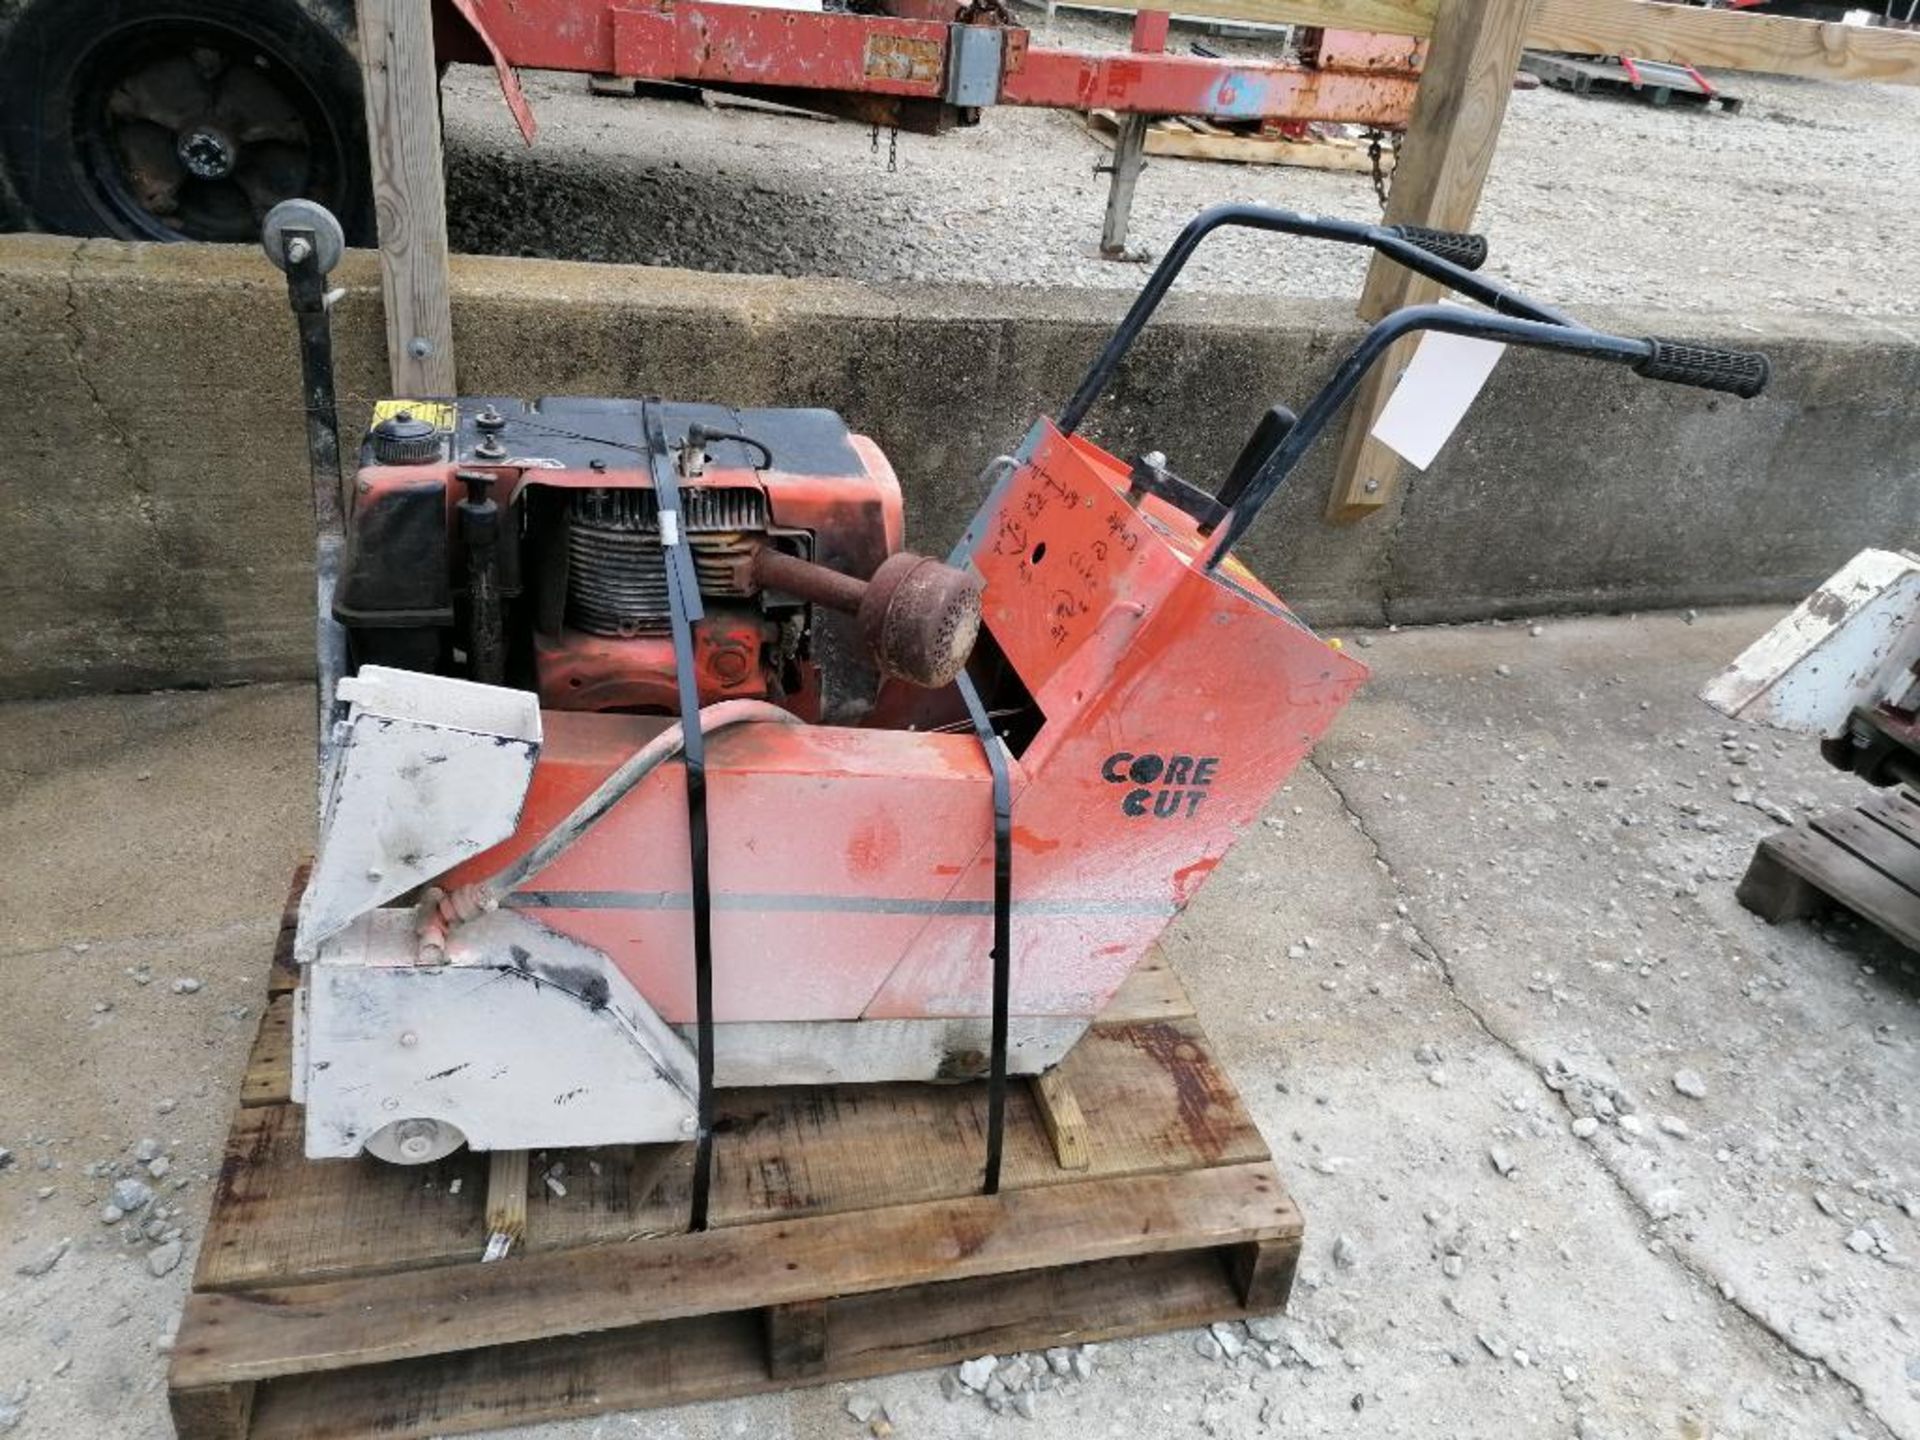 (1) CORE CUT CC1414K Walk Behind Concrete Saw, Serial #1255237 with Kohler Magnum 14 Engine. Located - Image 12 of 15